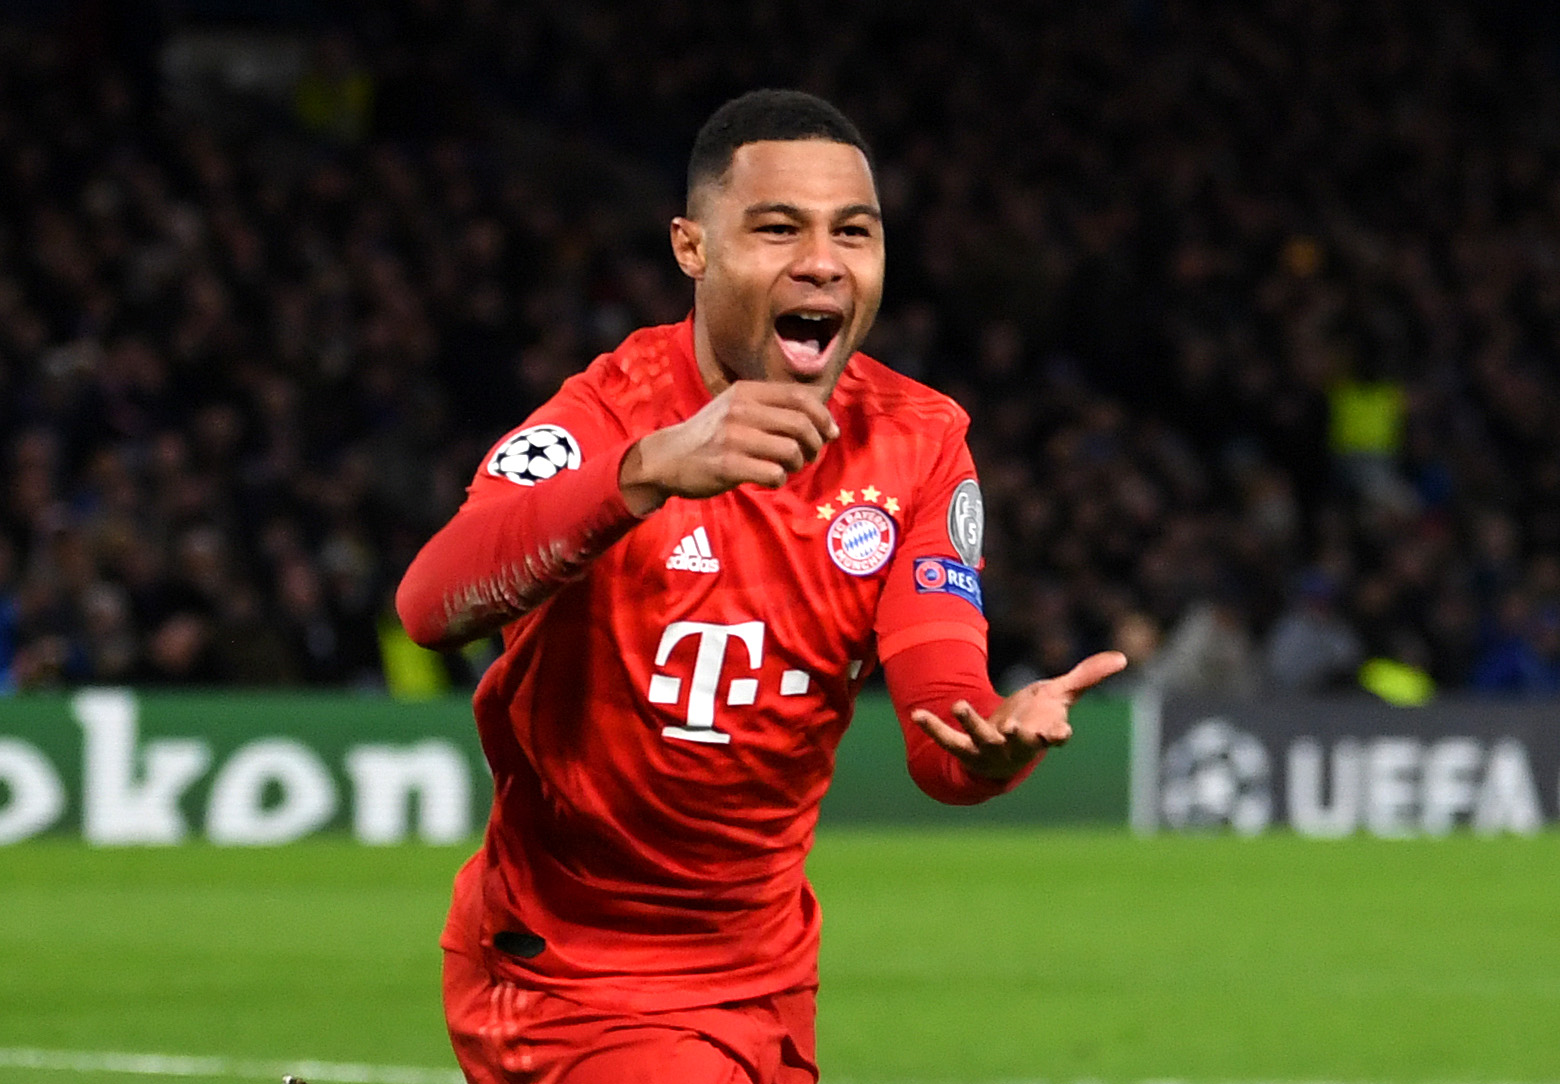 Lux on X: Gnabry to grab the winner! Watch the UEFA Champions League final  with BT Sport LIVE on . #AD    / X